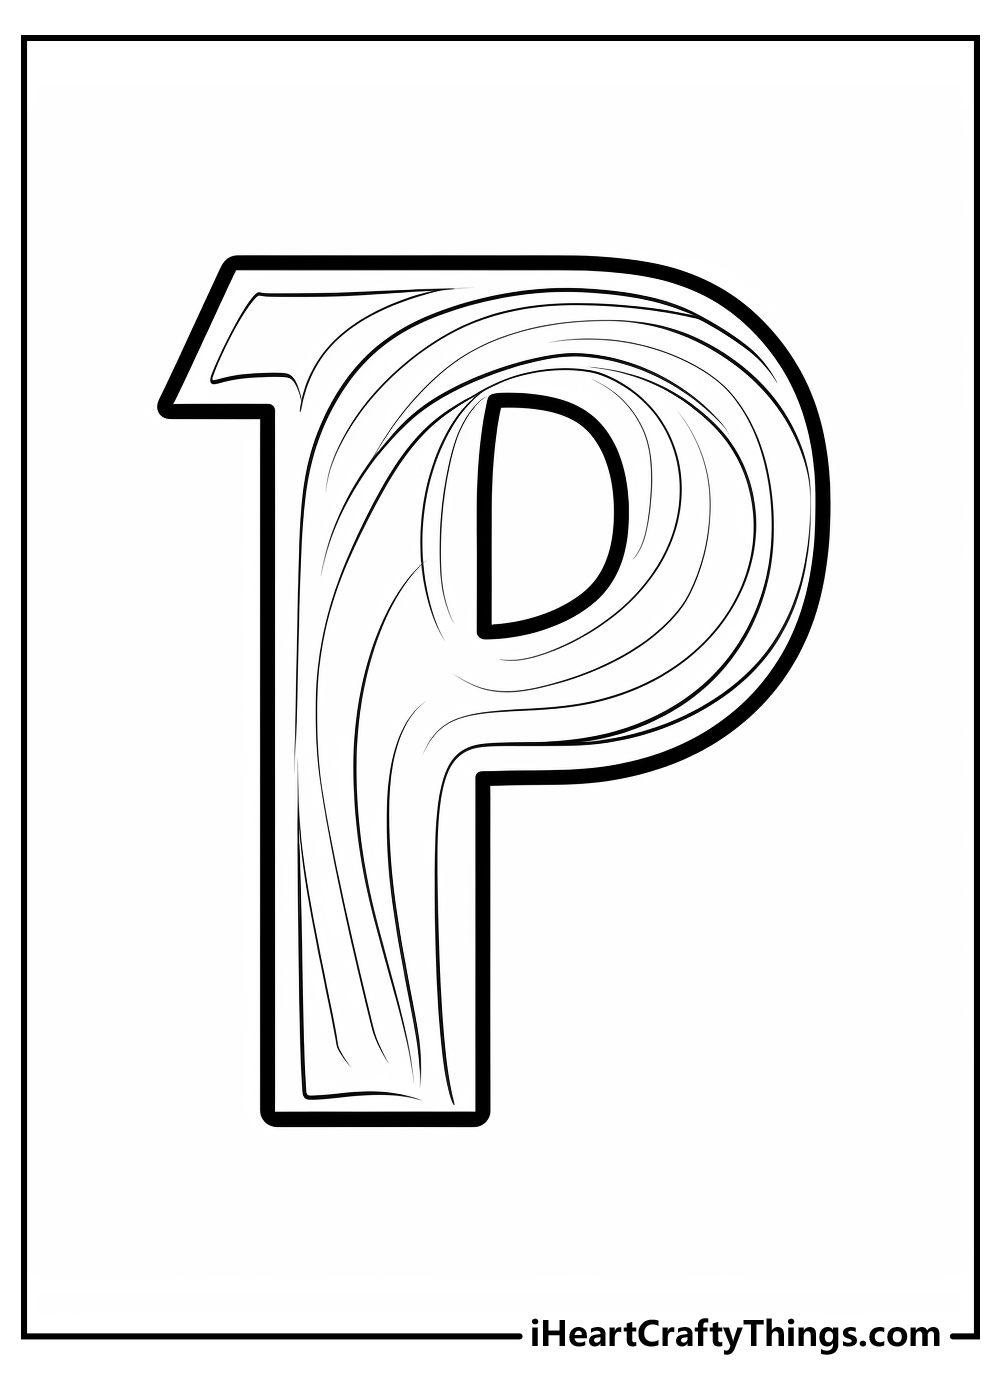 letter P coloring sheet free download